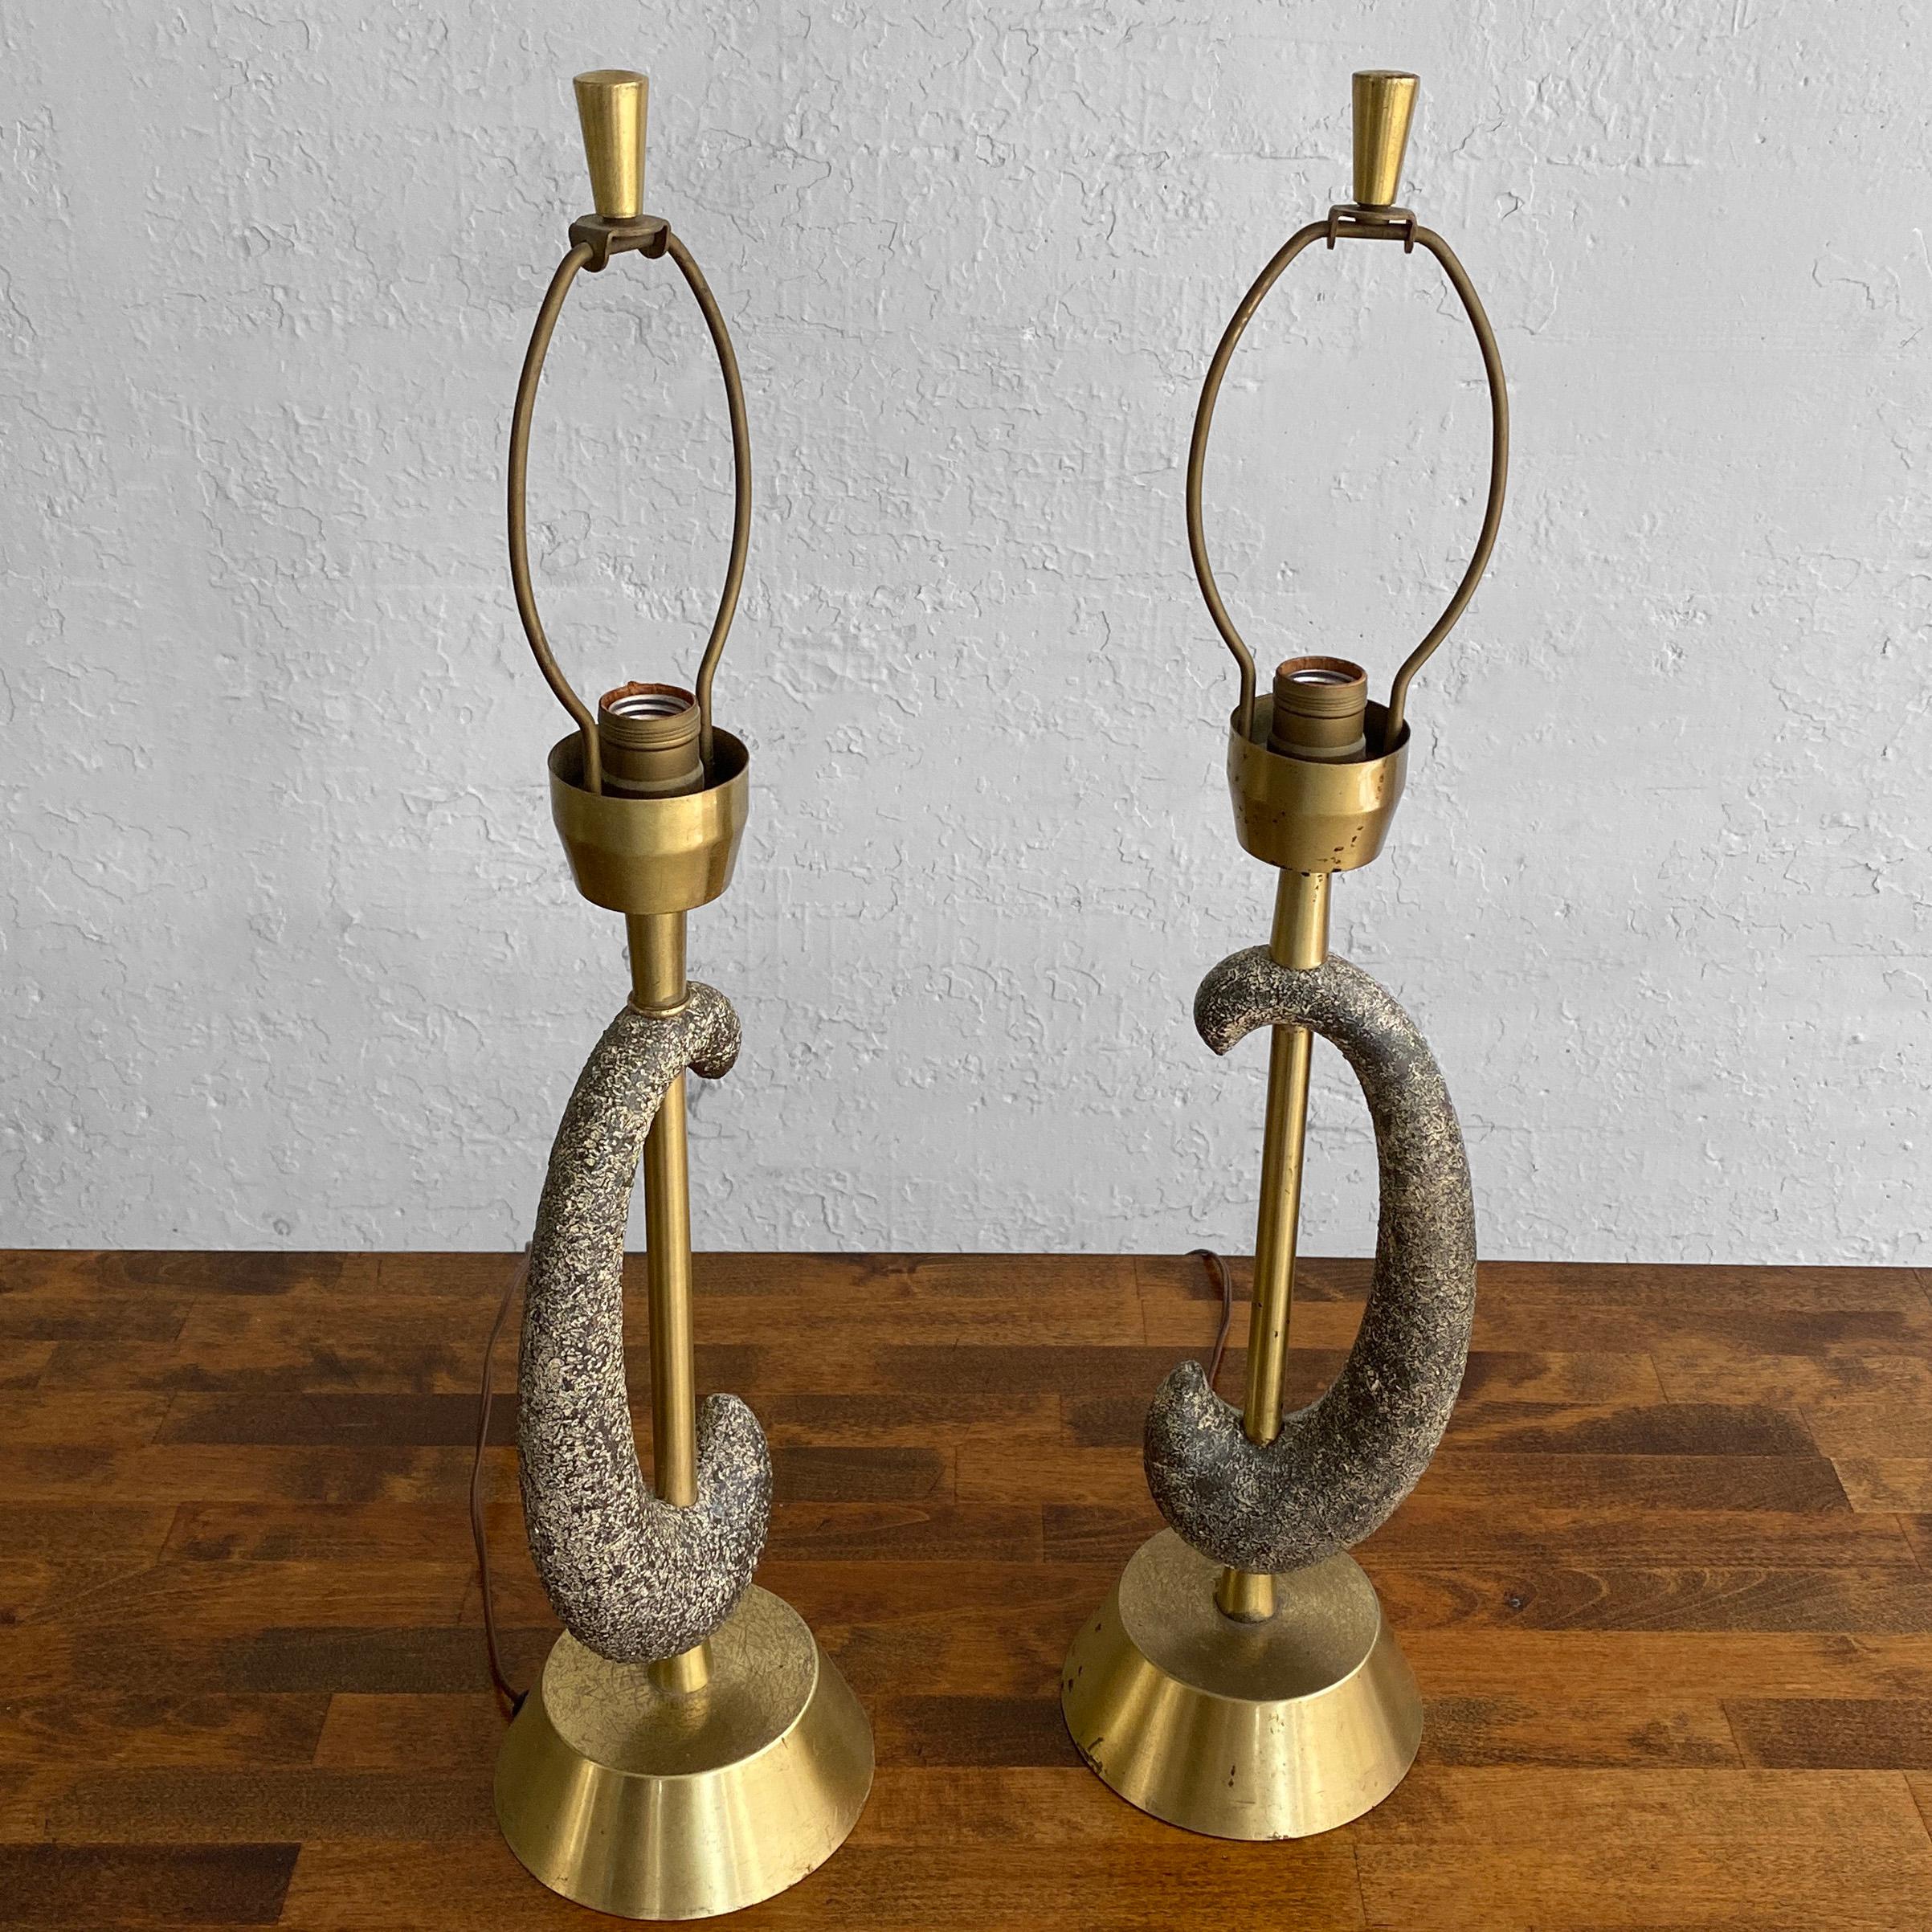 Pair of Brass and Ceramic Arc Table Lamps by Kelby In Good Condition For Sale In Brooklyn, NY